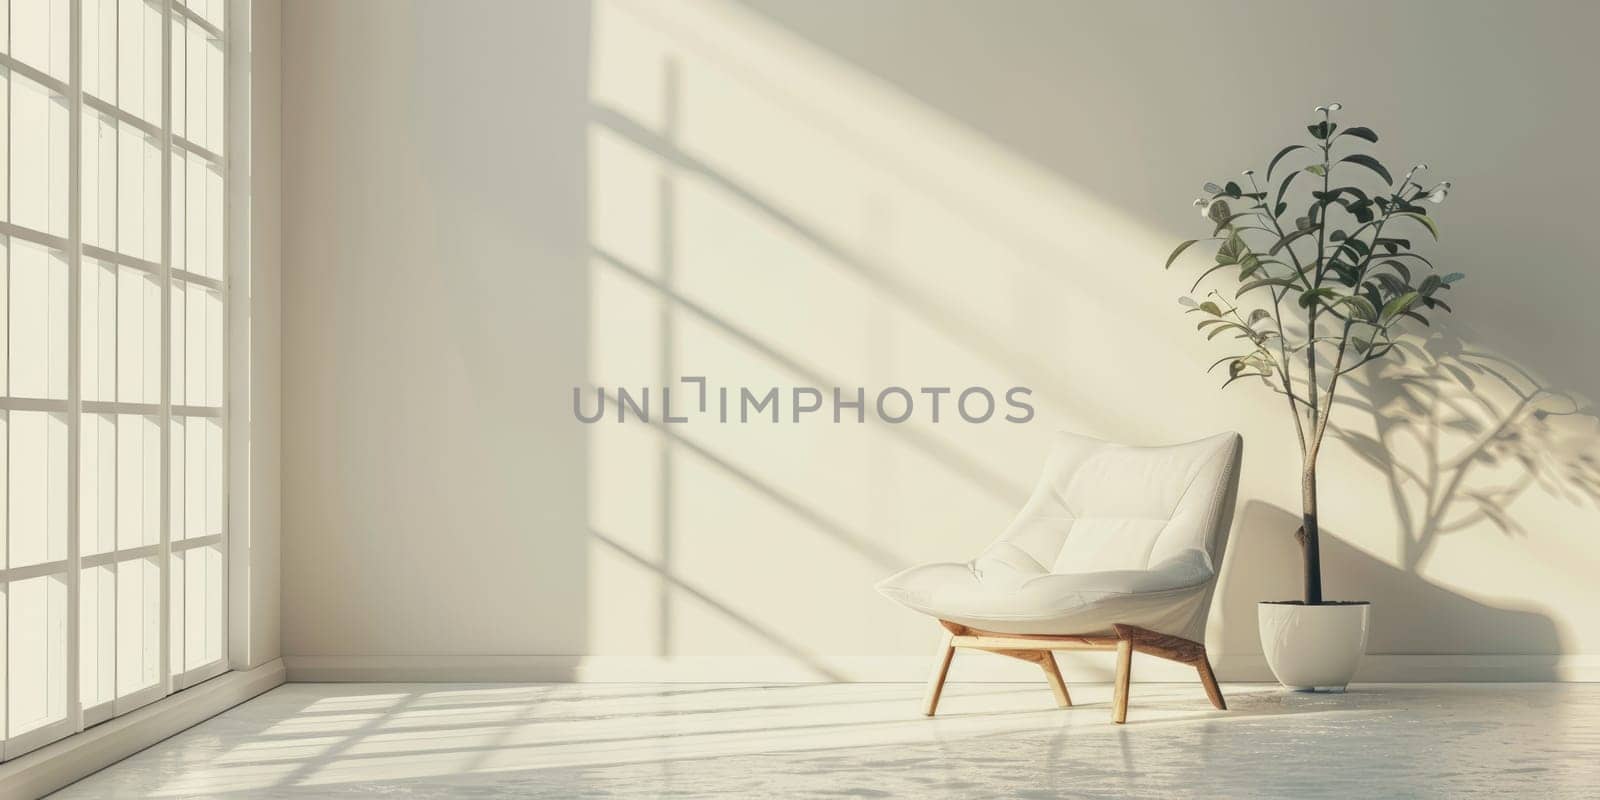 A white chair sits in front of a window with a potted plant. The room is bright and airy, with sunlight streaming in through the window. The chair and plant create a sense of calm and relaxation